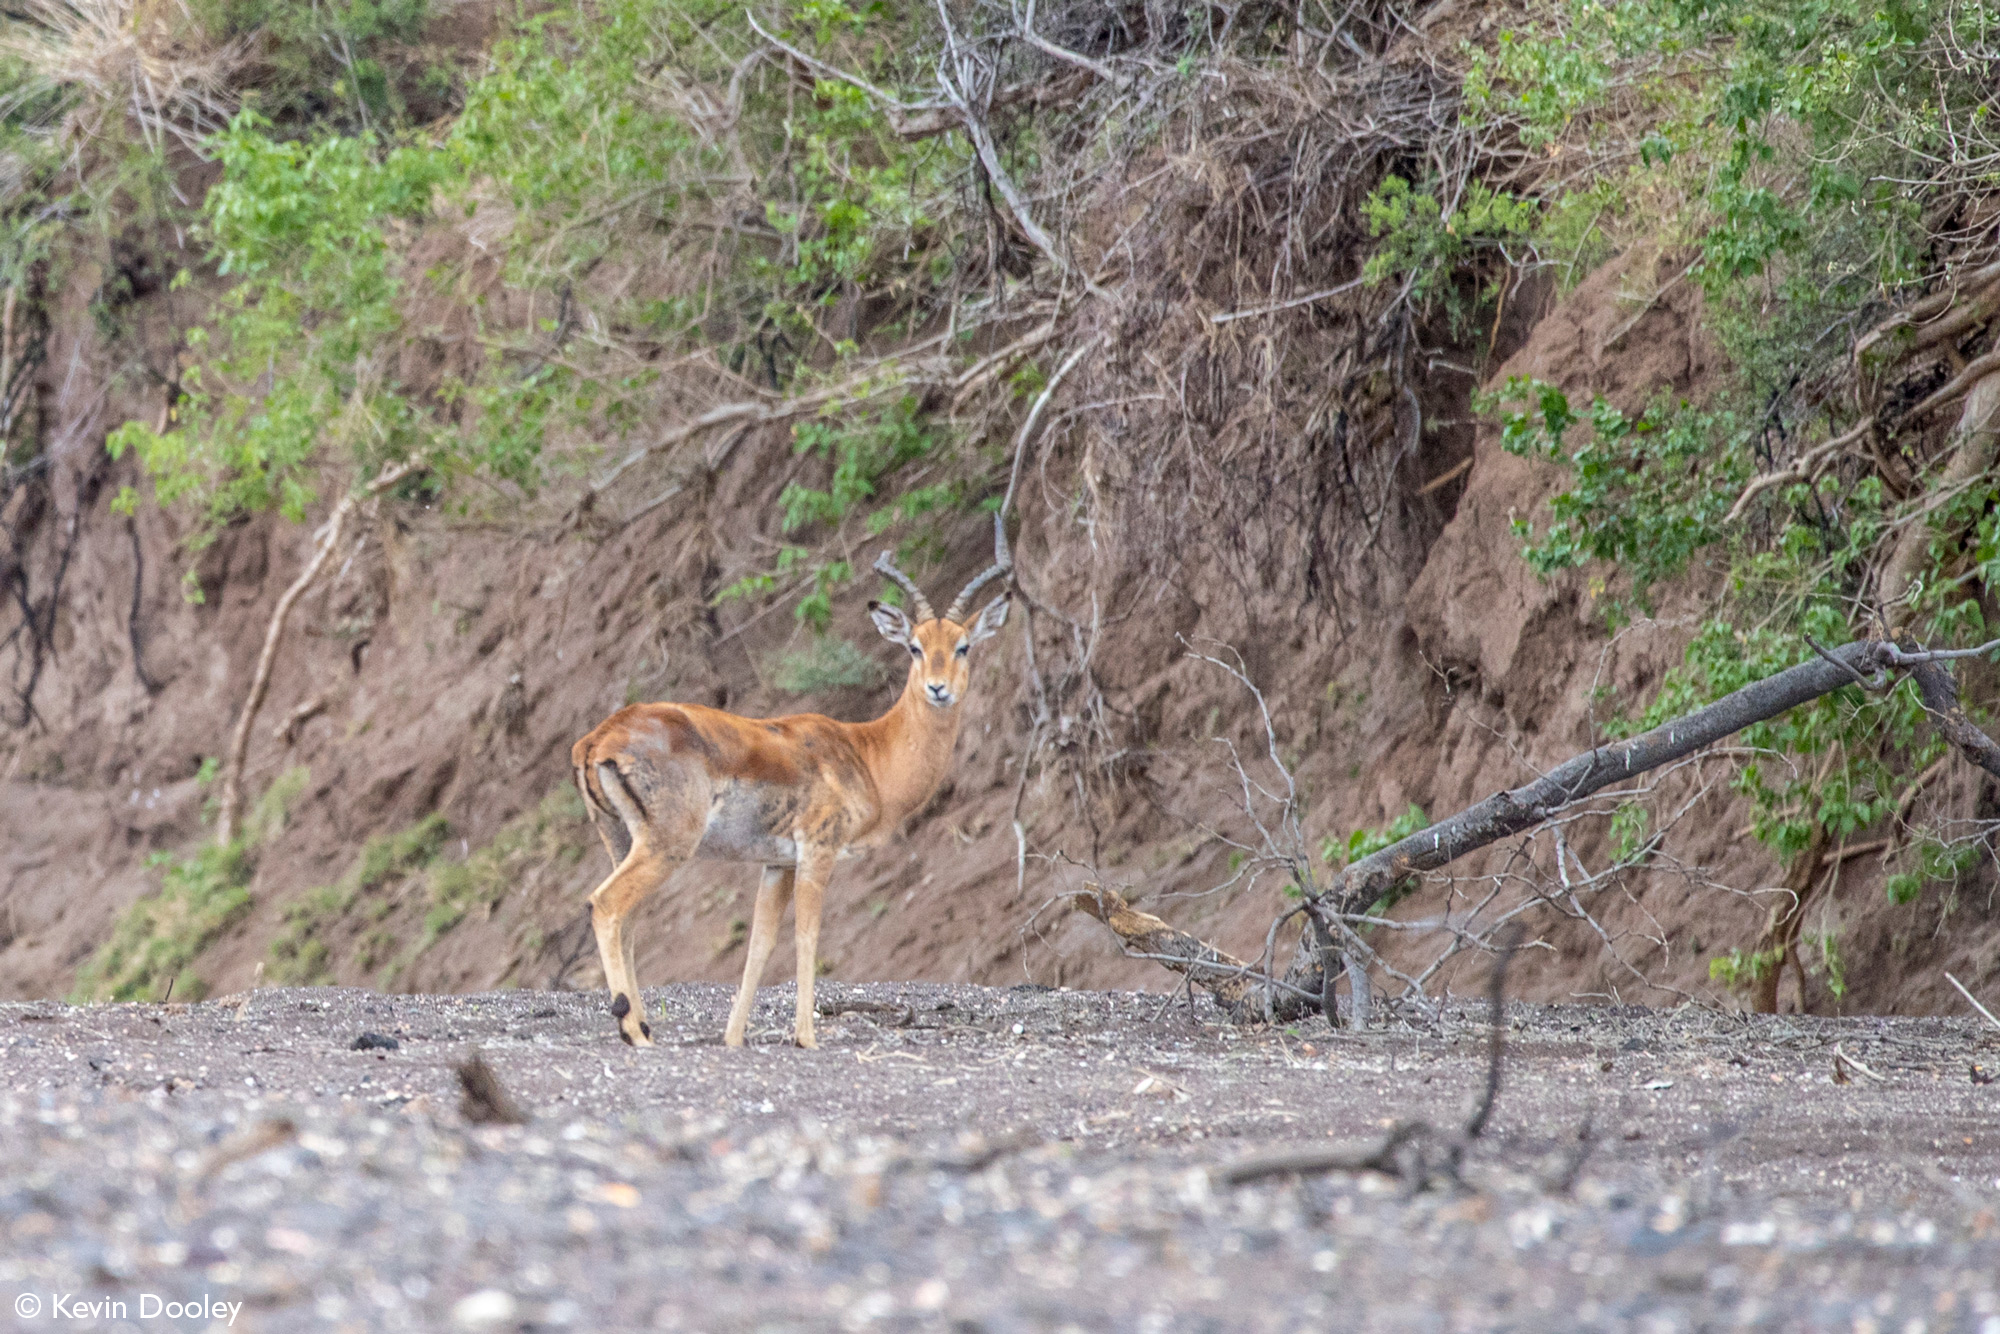 Male impala standing in dry riverbed